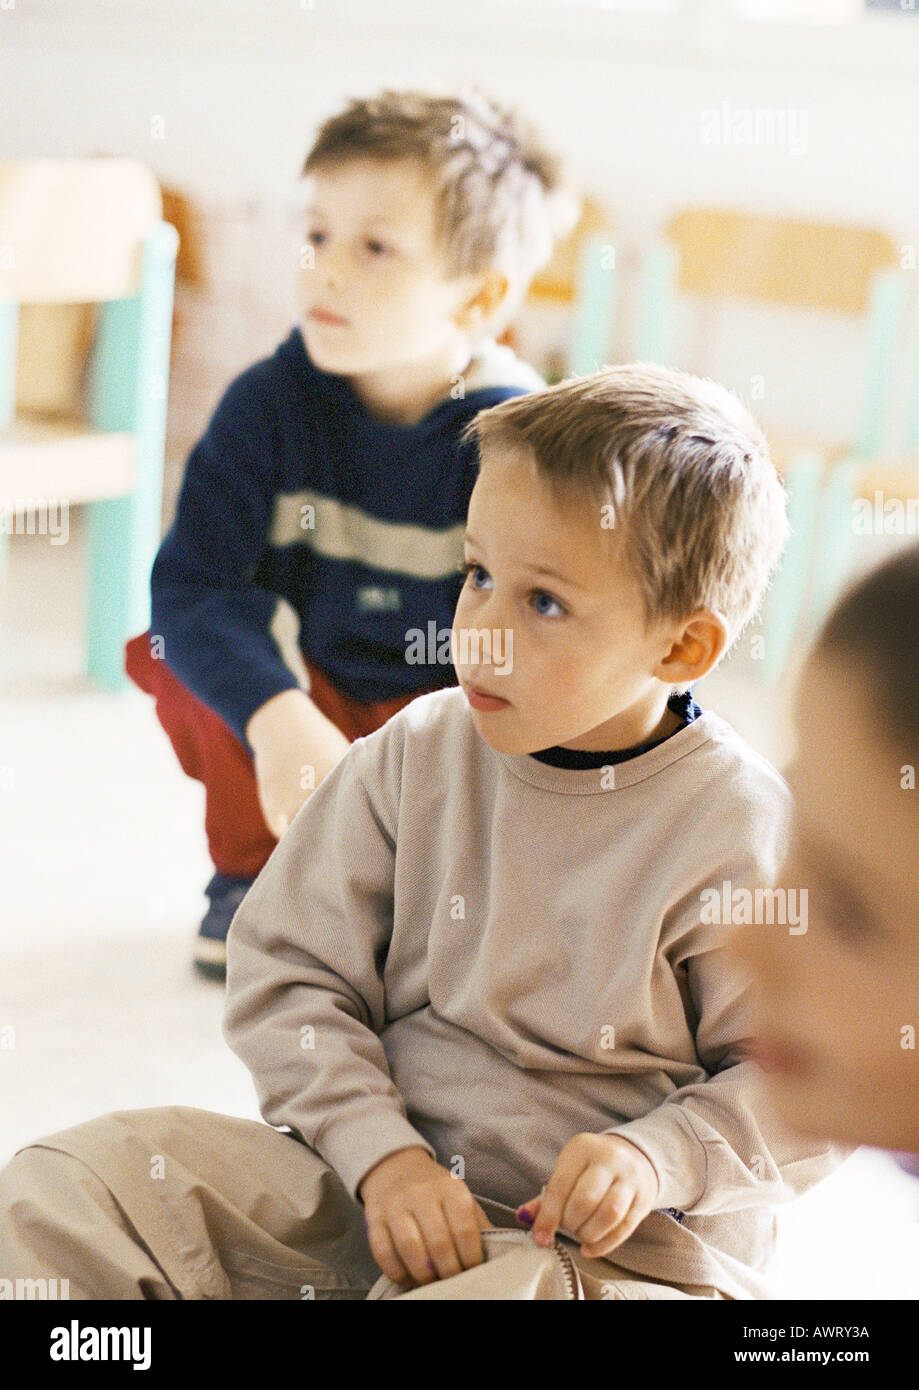 Children looking attentive in classroom Stock Photo